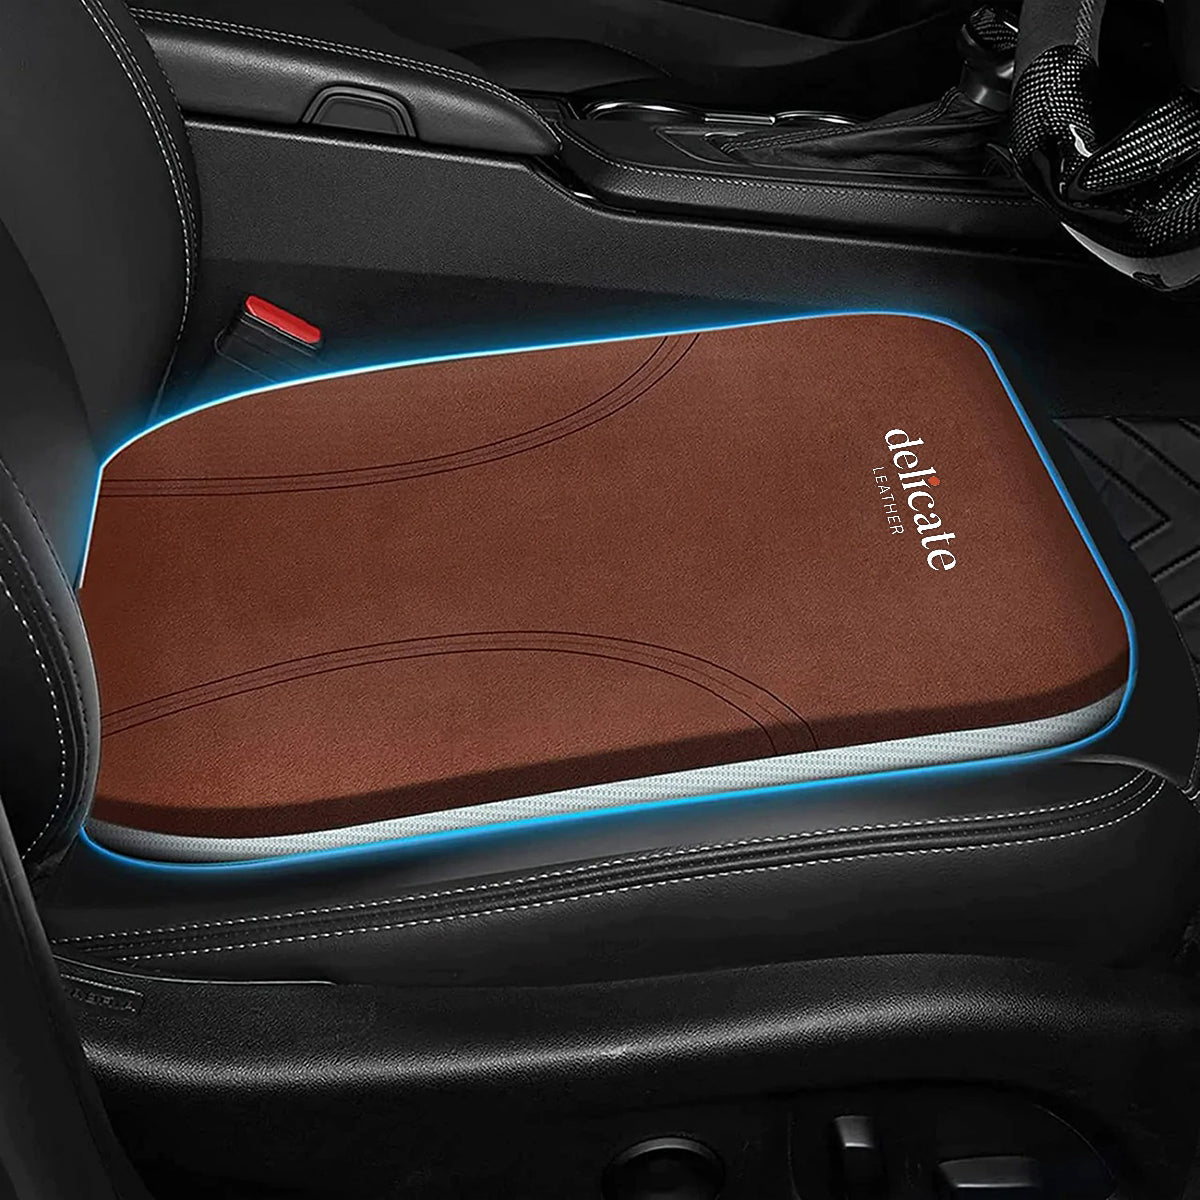 Jeep Car Seat Cushion: Enhance Comfort and Support for Your Drive